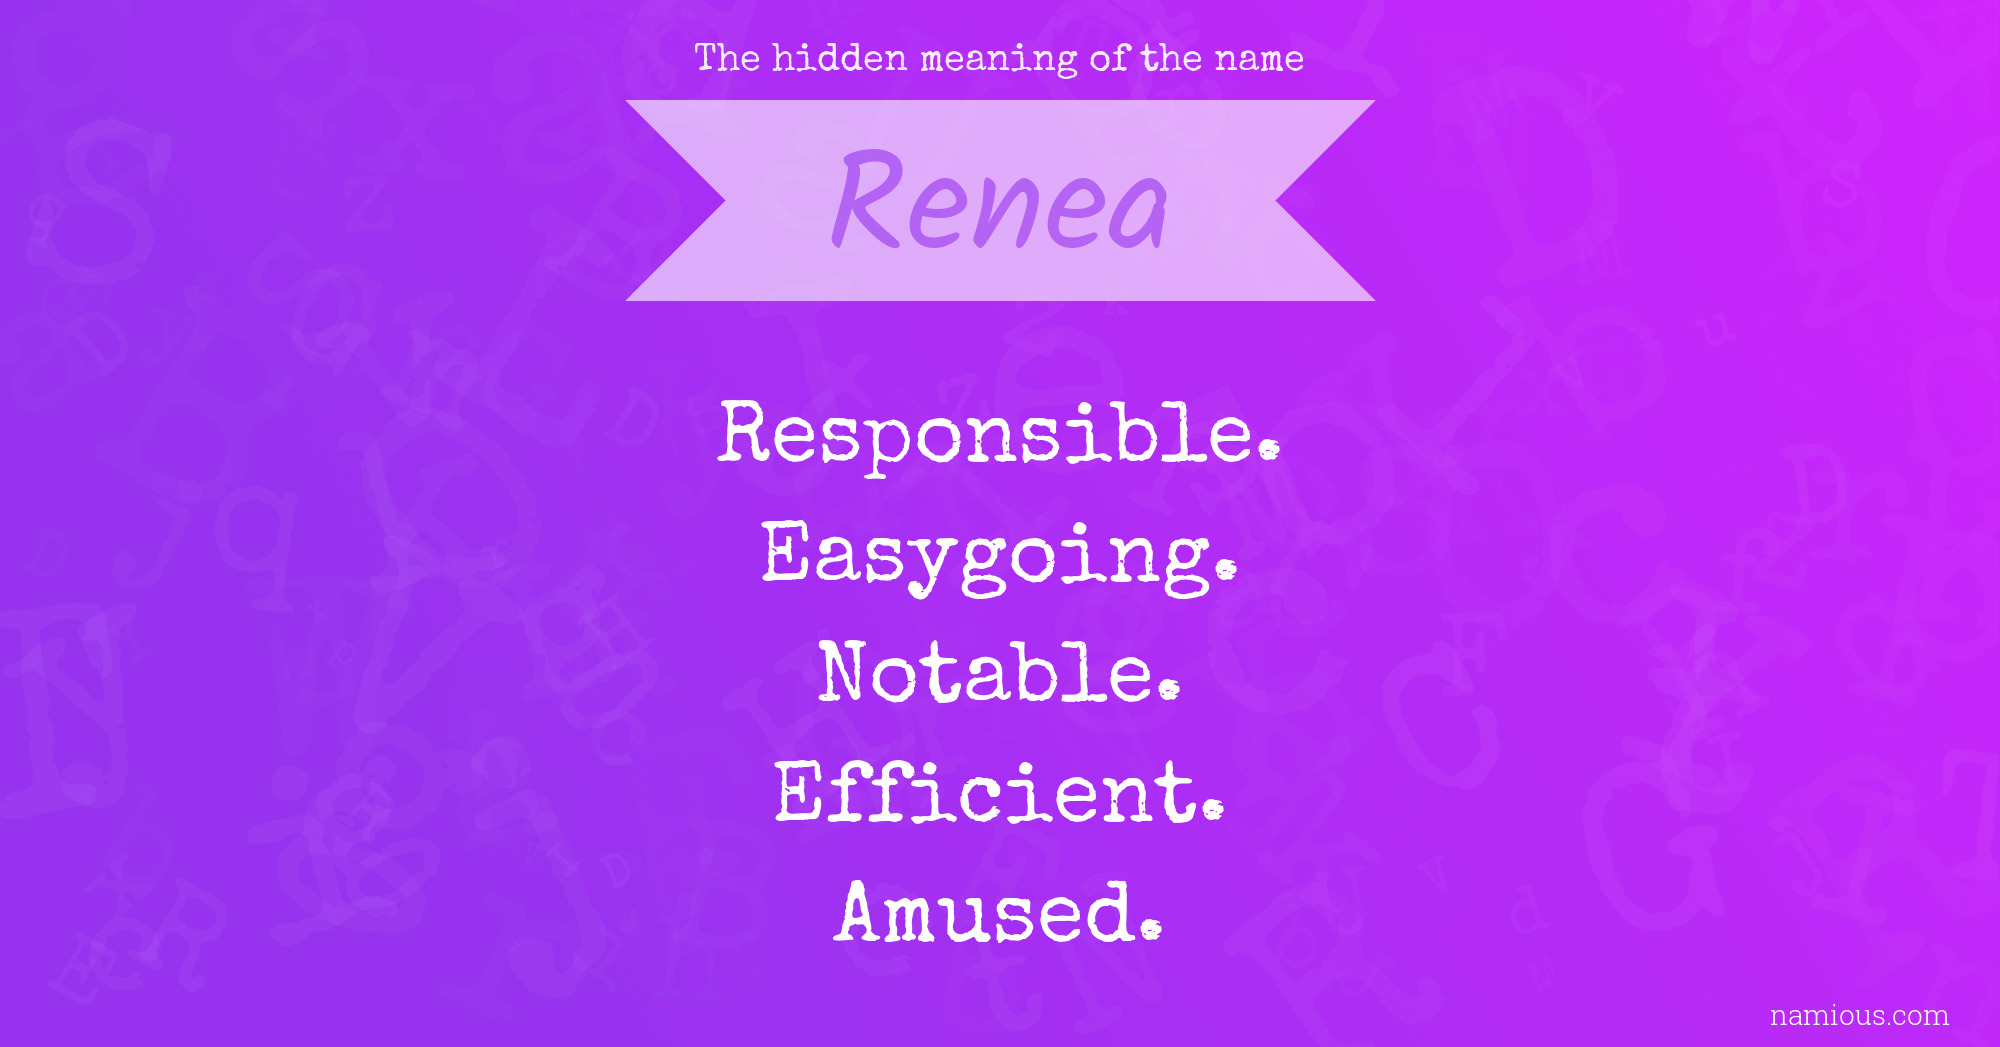 The hidden meaning of the name Renea